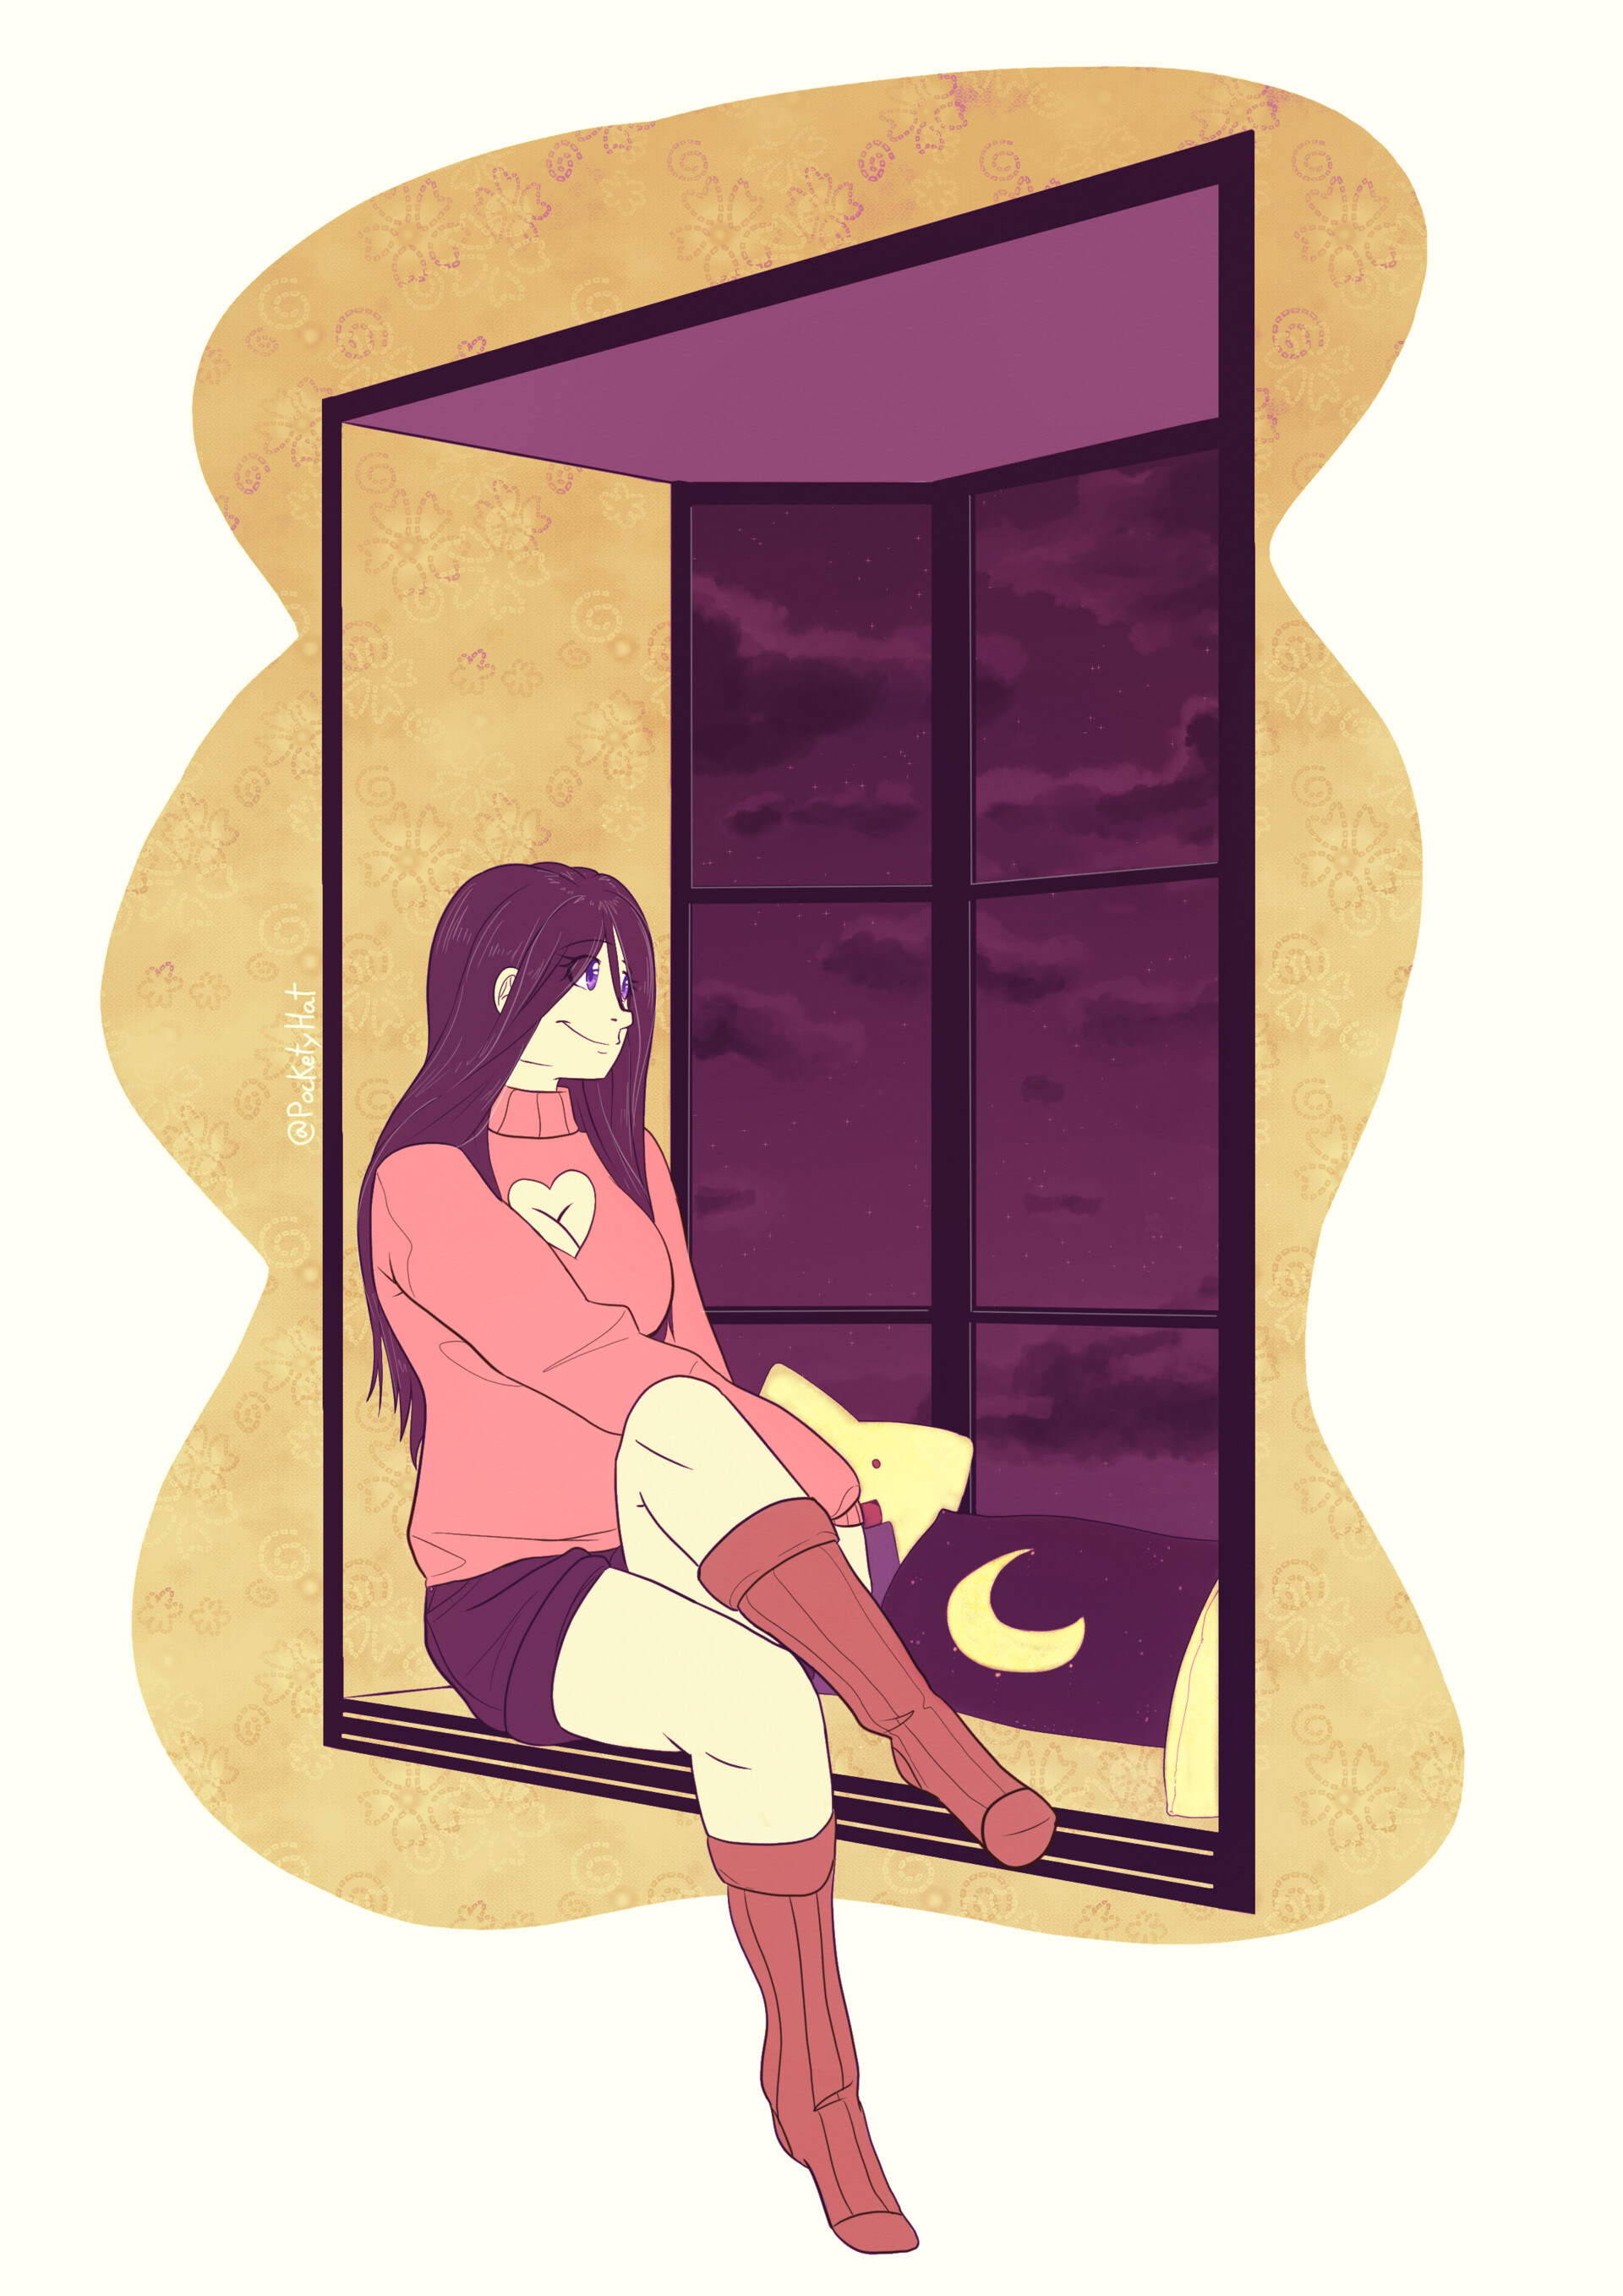 Catty sitting by the window, character belongs to PhillipGFA, 2019